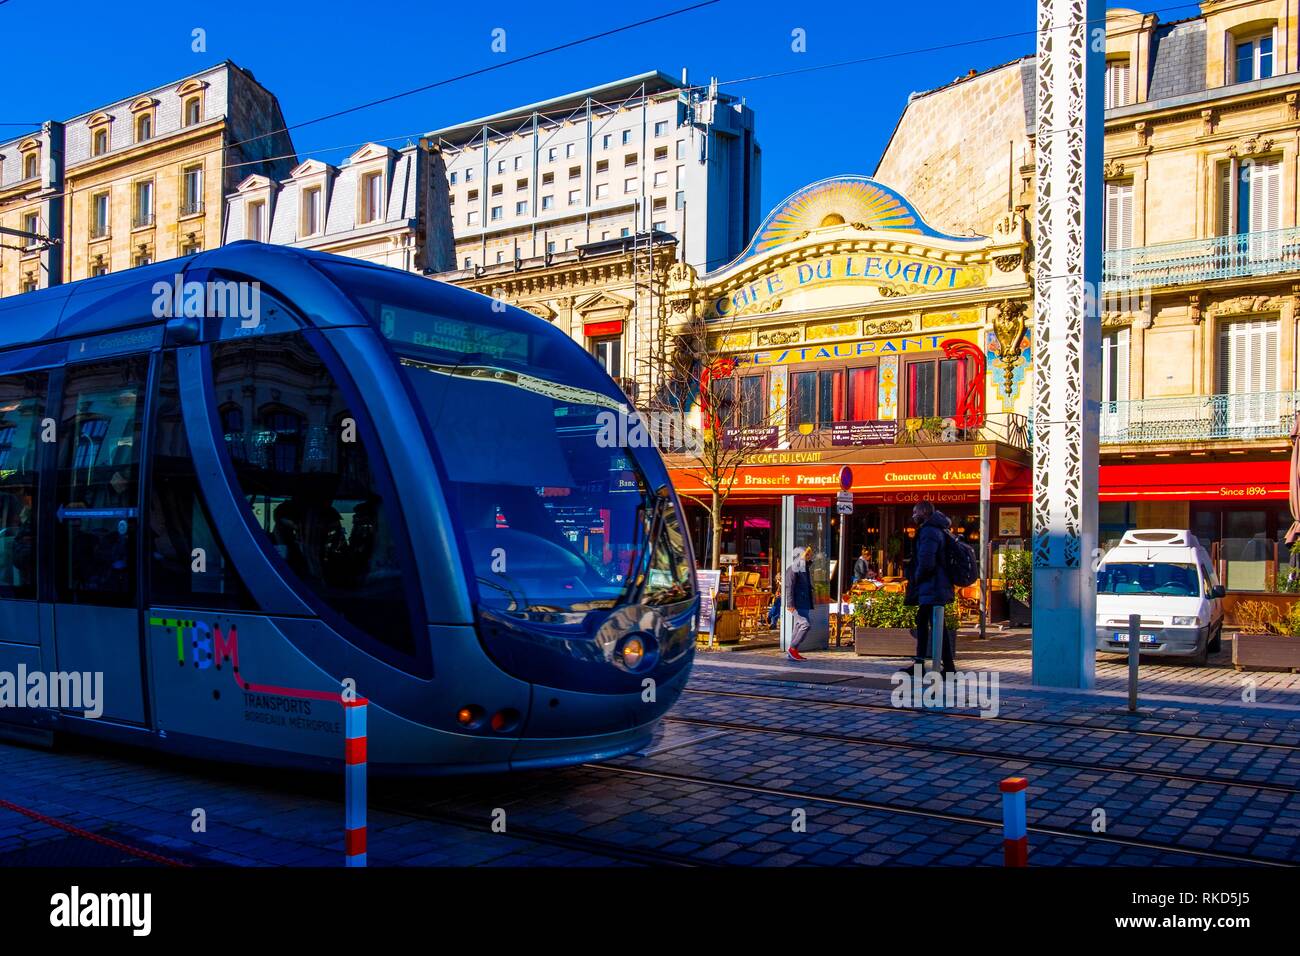 France, Nouvelle Aquitaine, Gironde, Tramway at Gare saint Jean at Bordeaux. Stock Photo